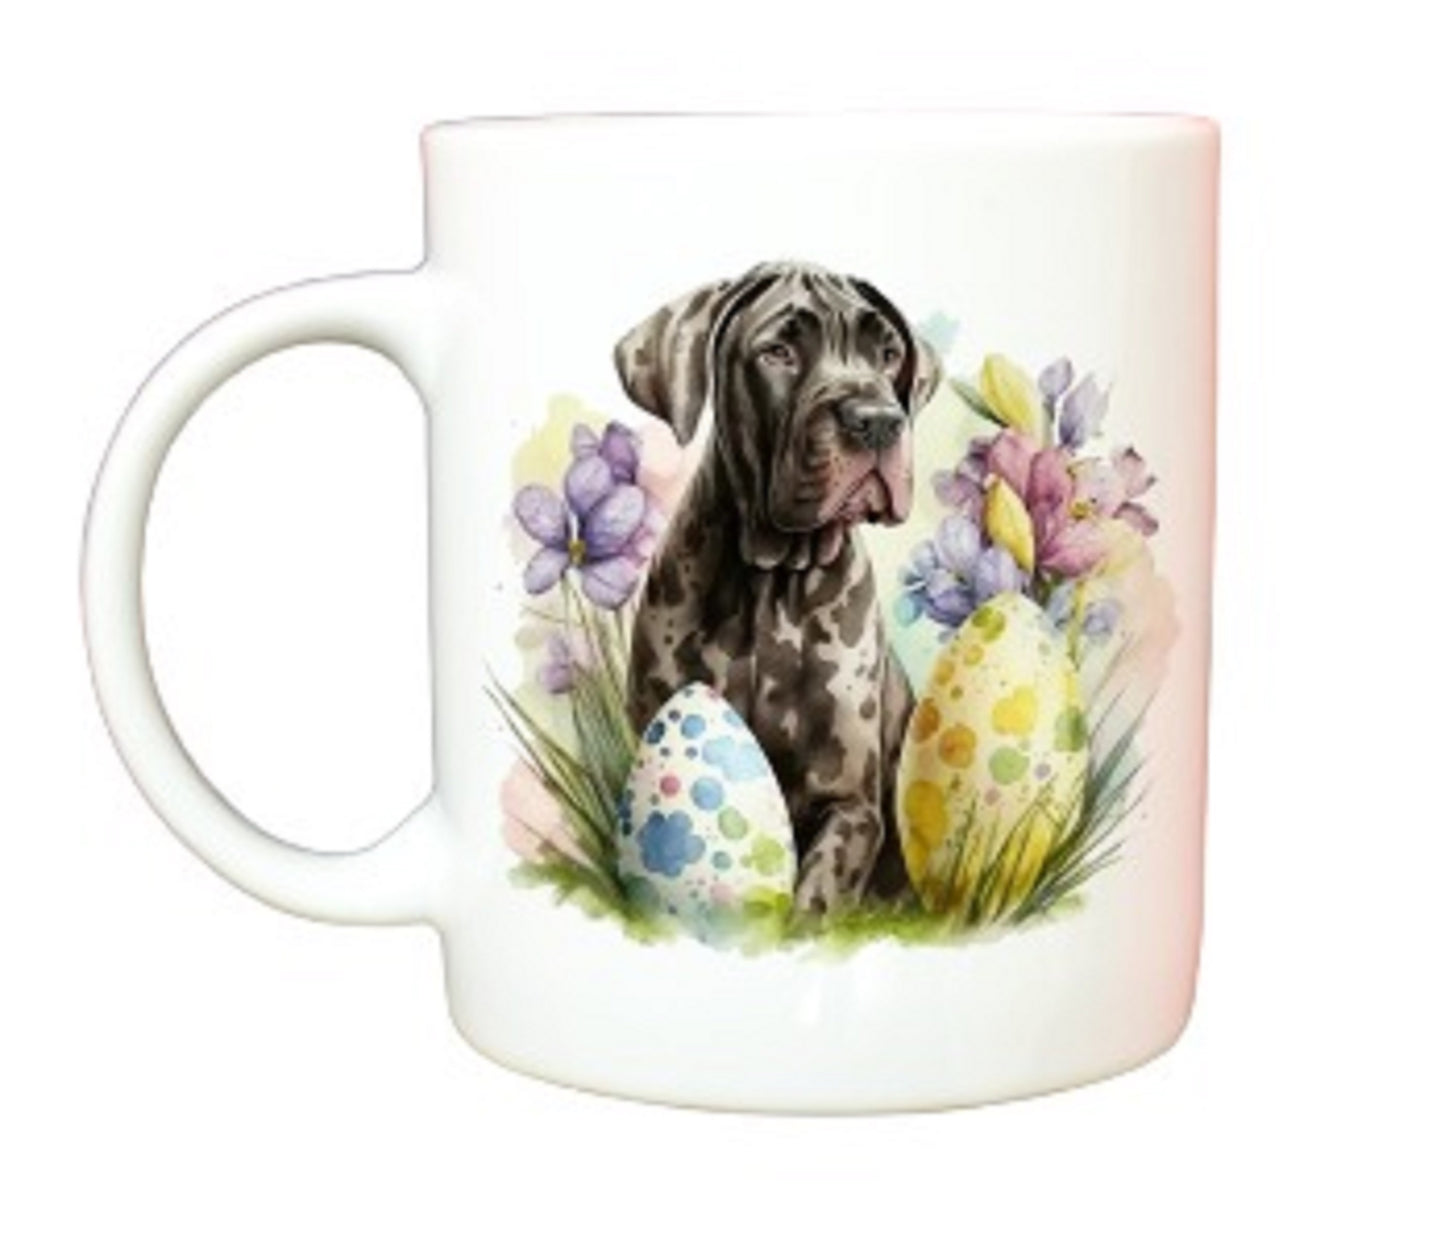  Easter Dog Mug in Various Breeds by Free Spirit Accessories sold by Free Spirit Accessories